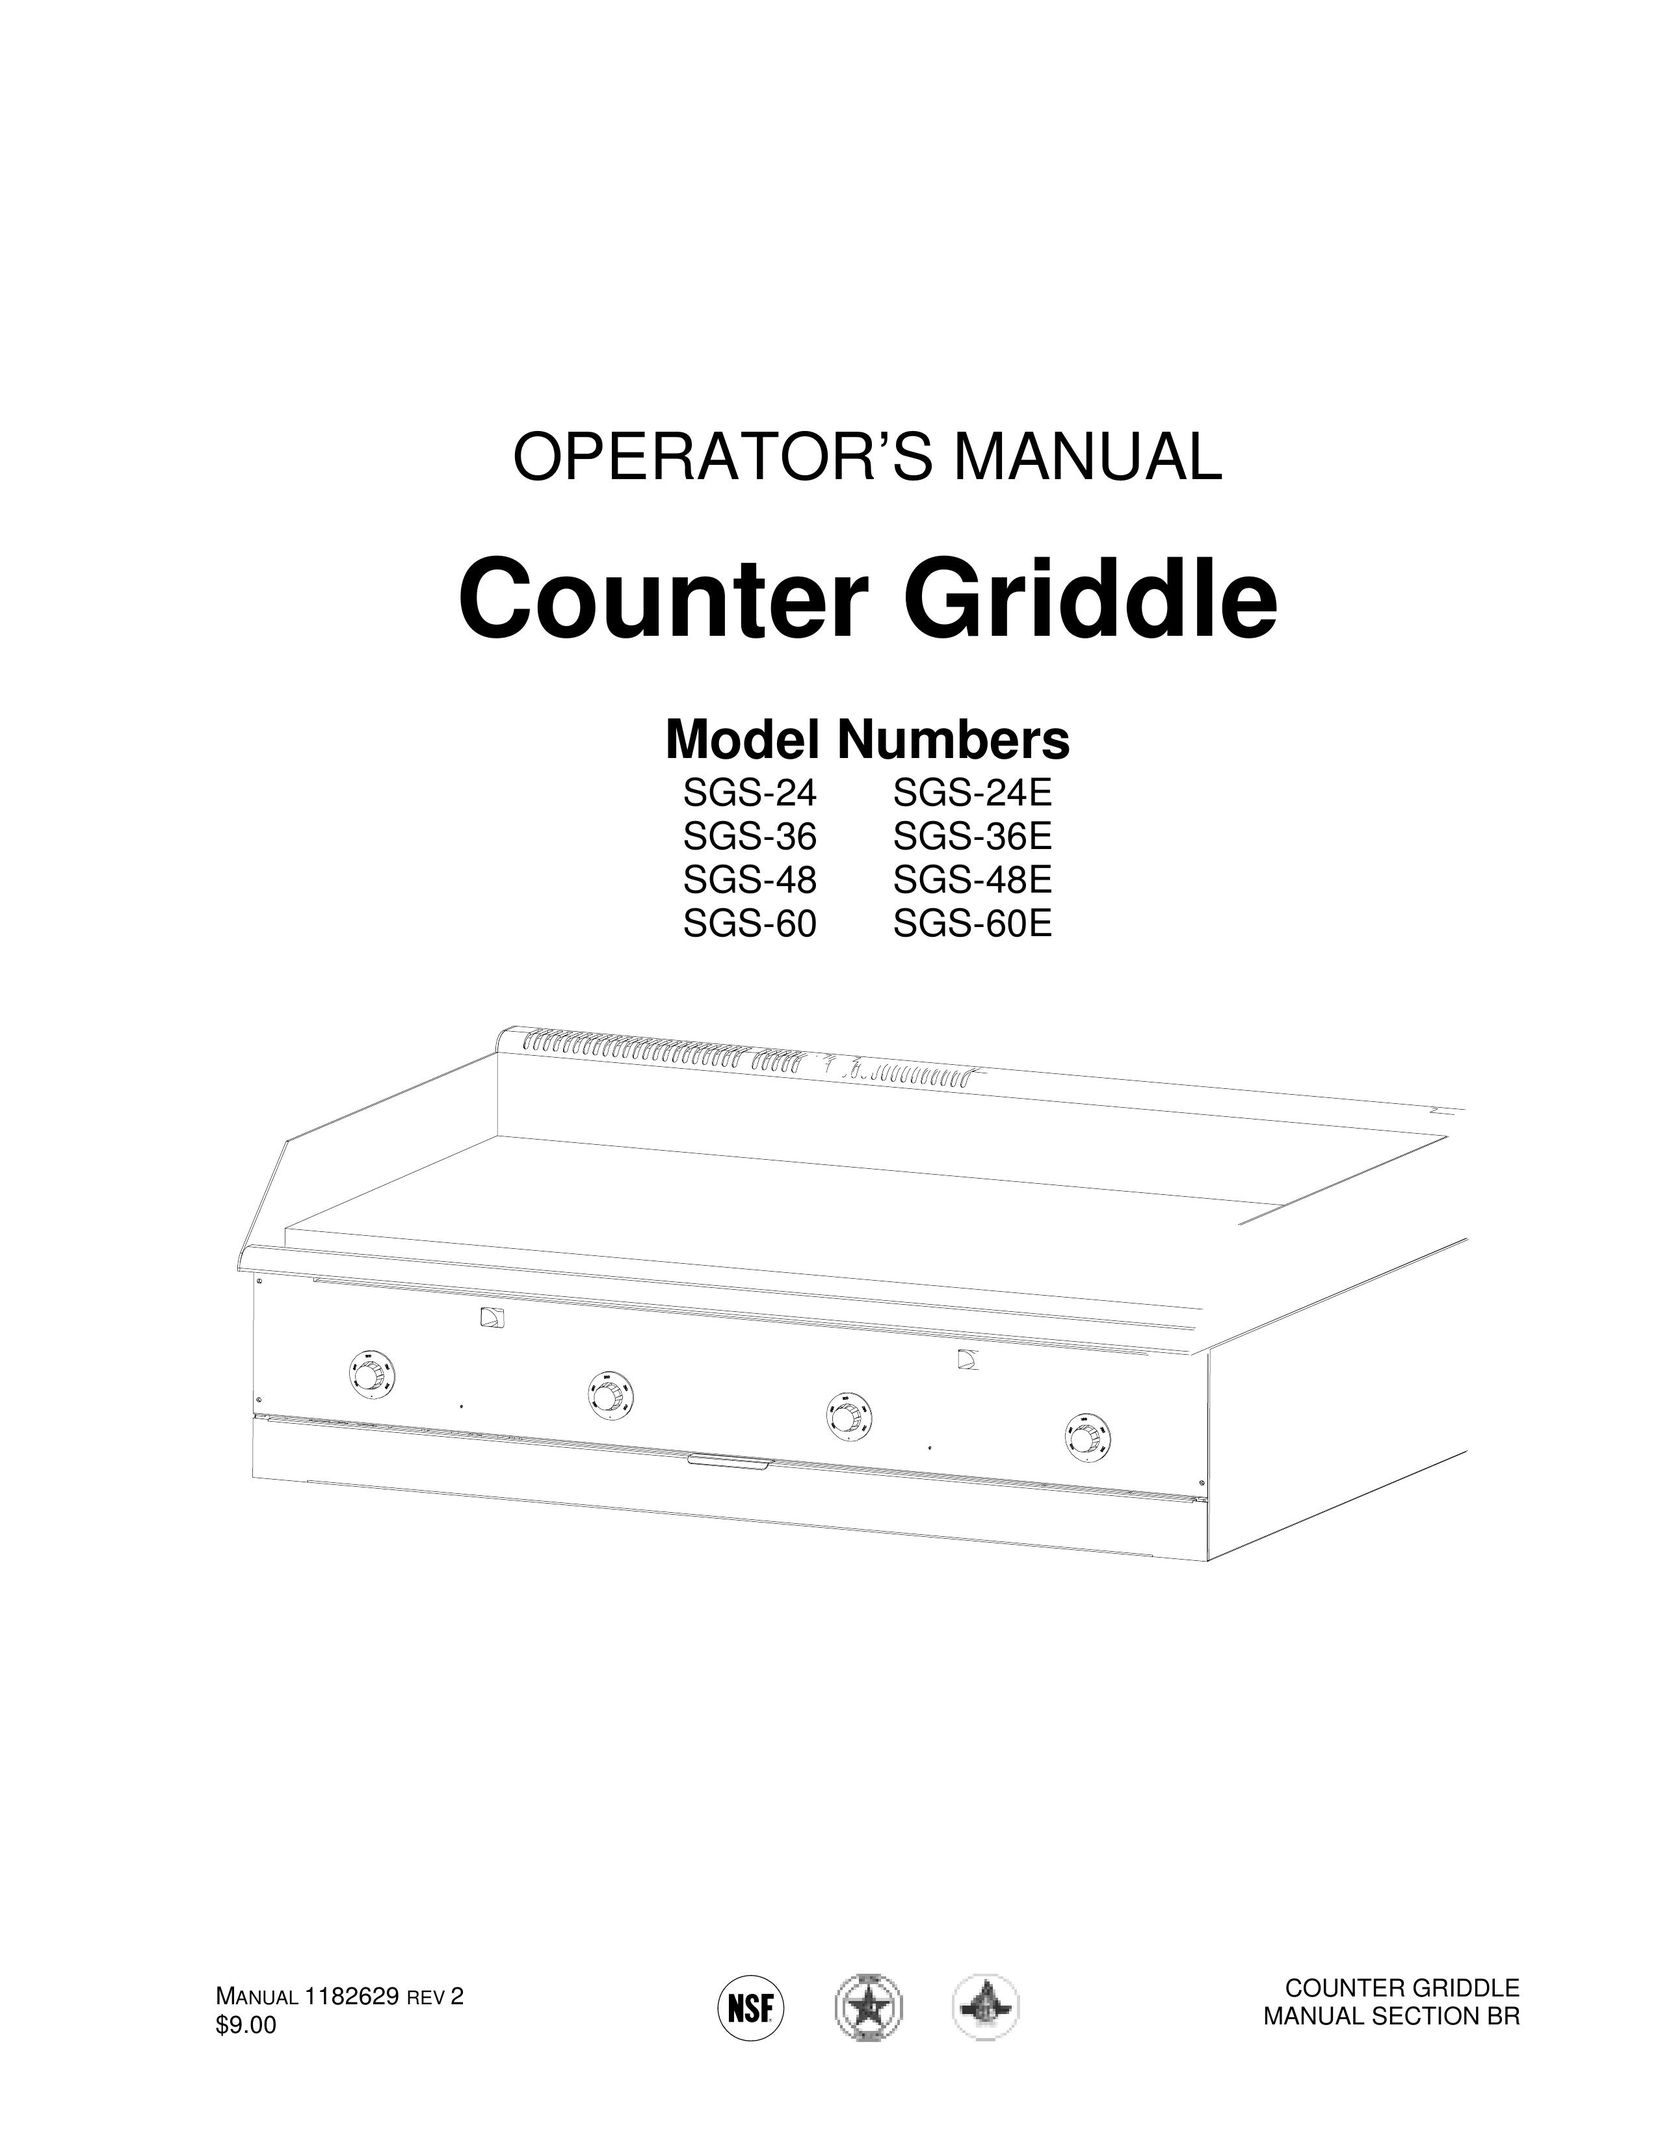 Southbend SGS-24 Cooktop User Manual